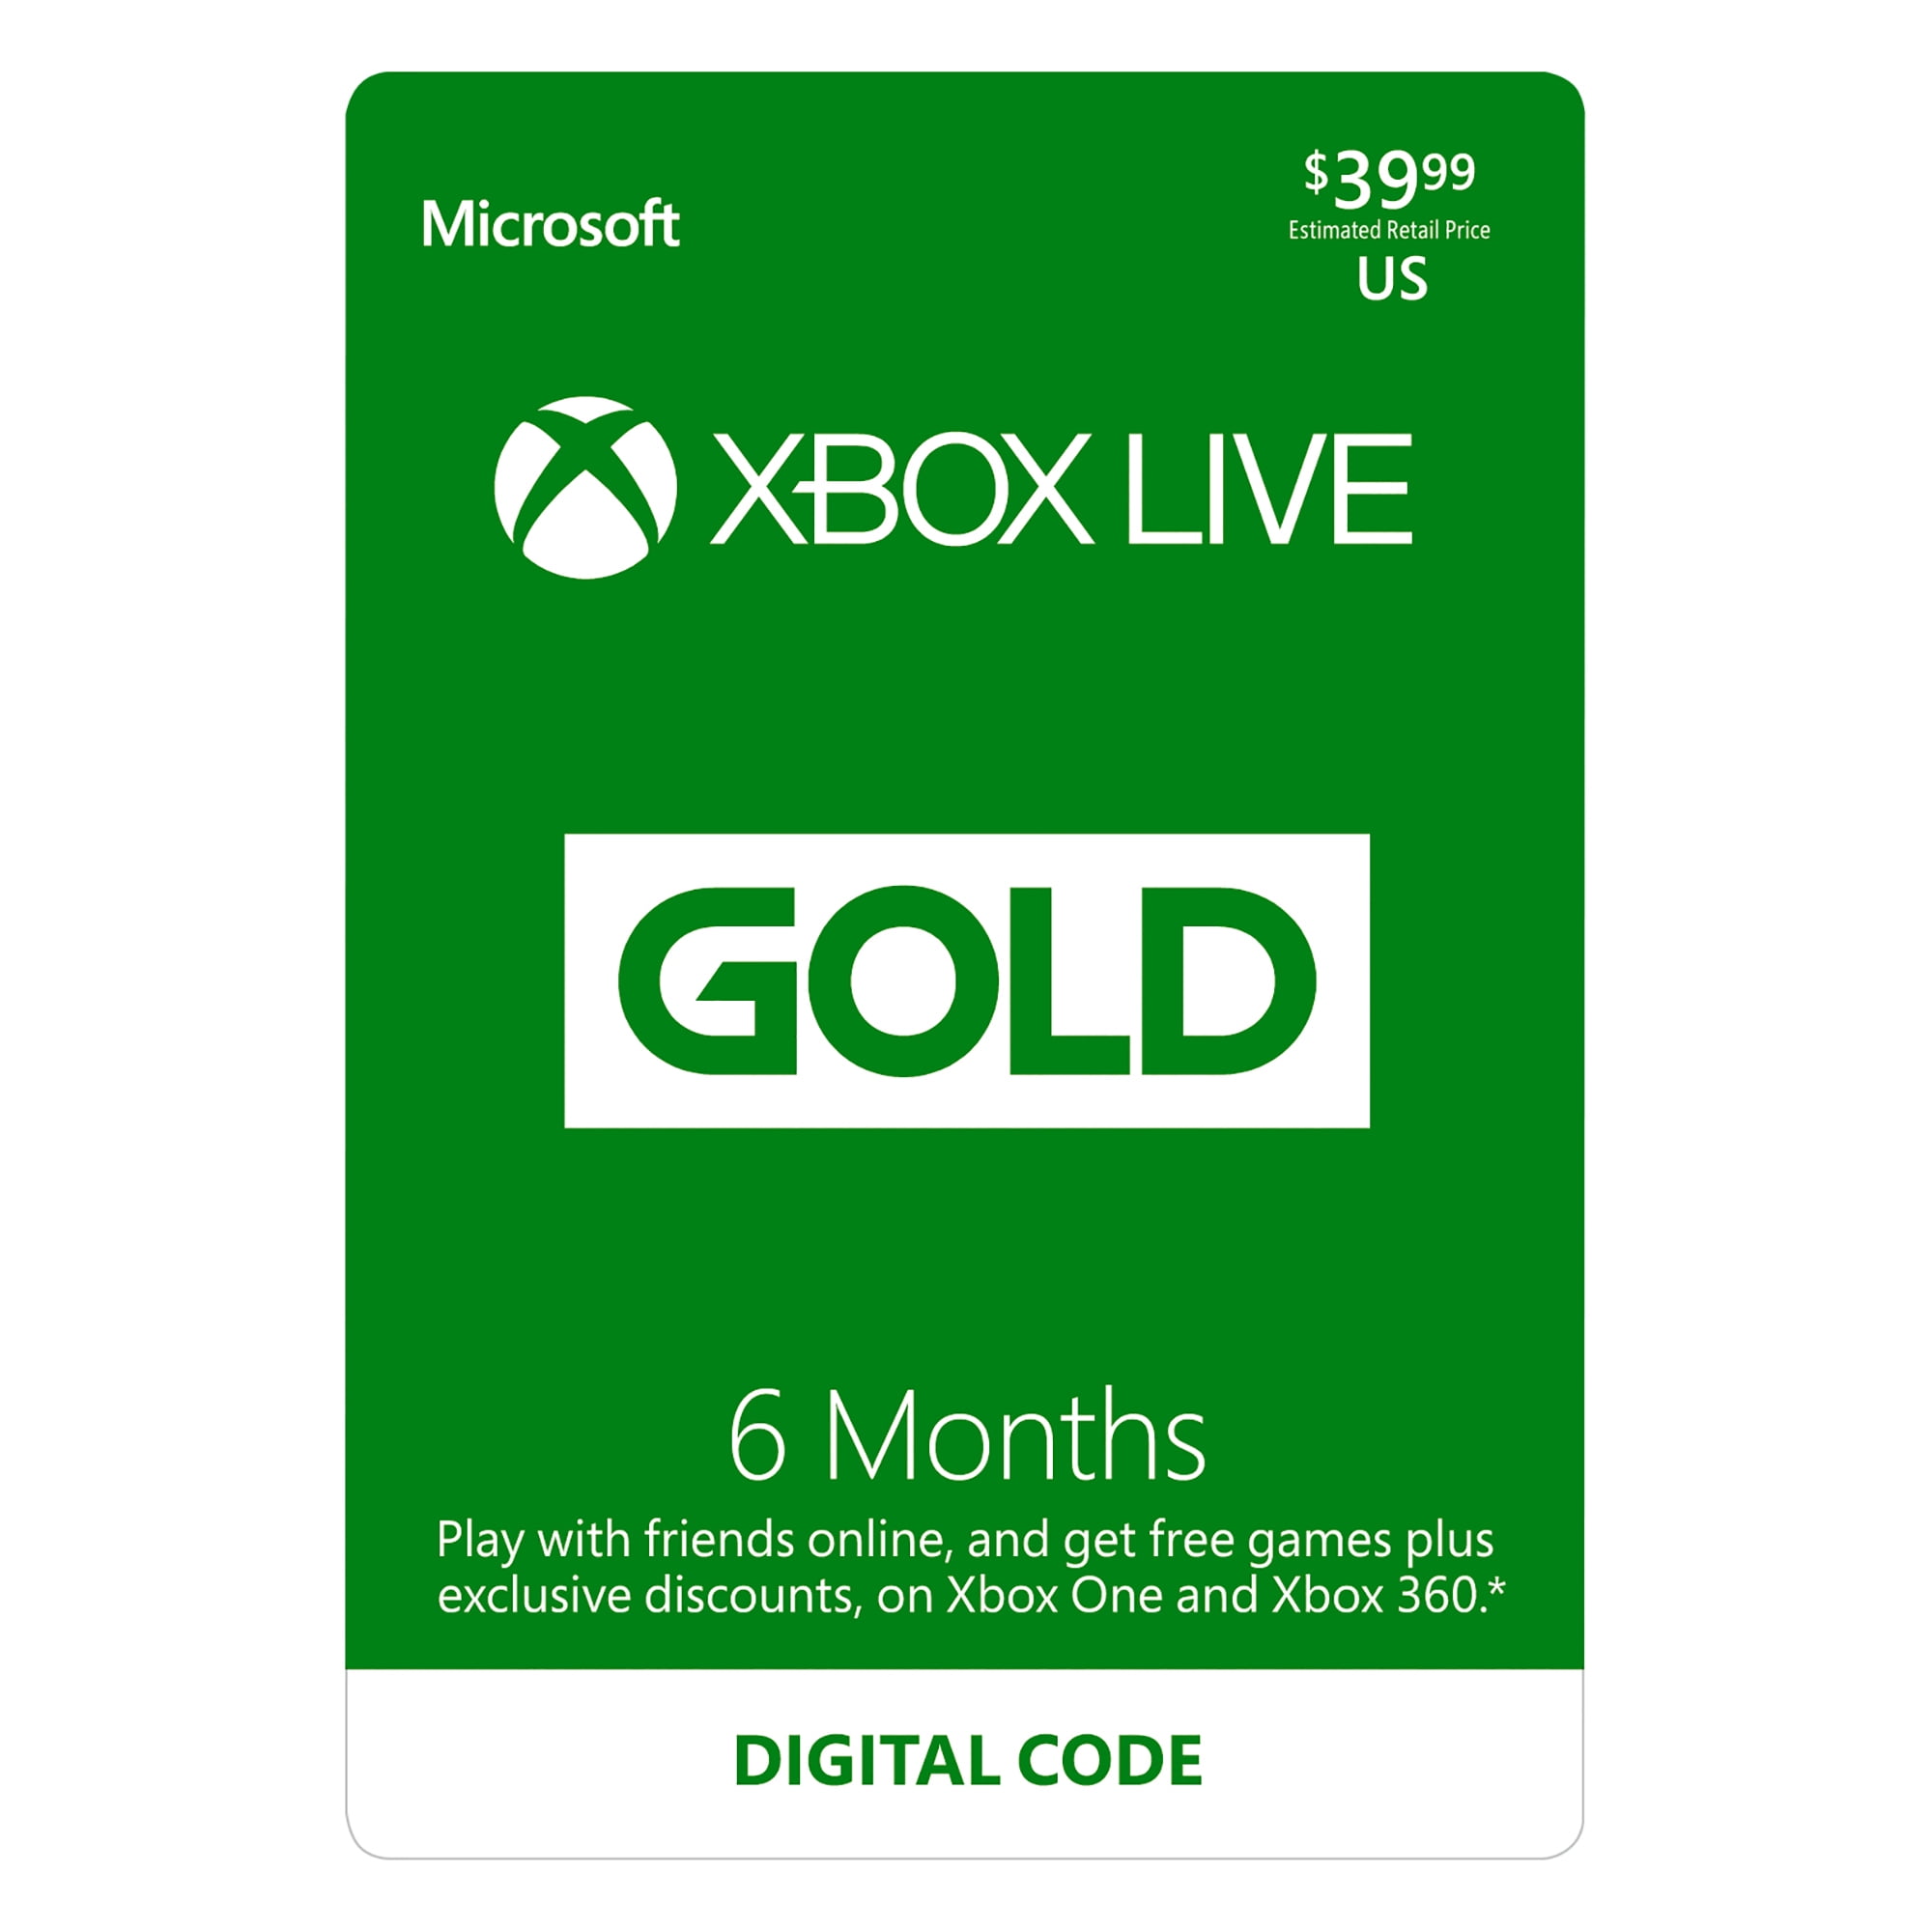 More Than 50 Games Are Now Free To Play Online Without Xbox Live Gold